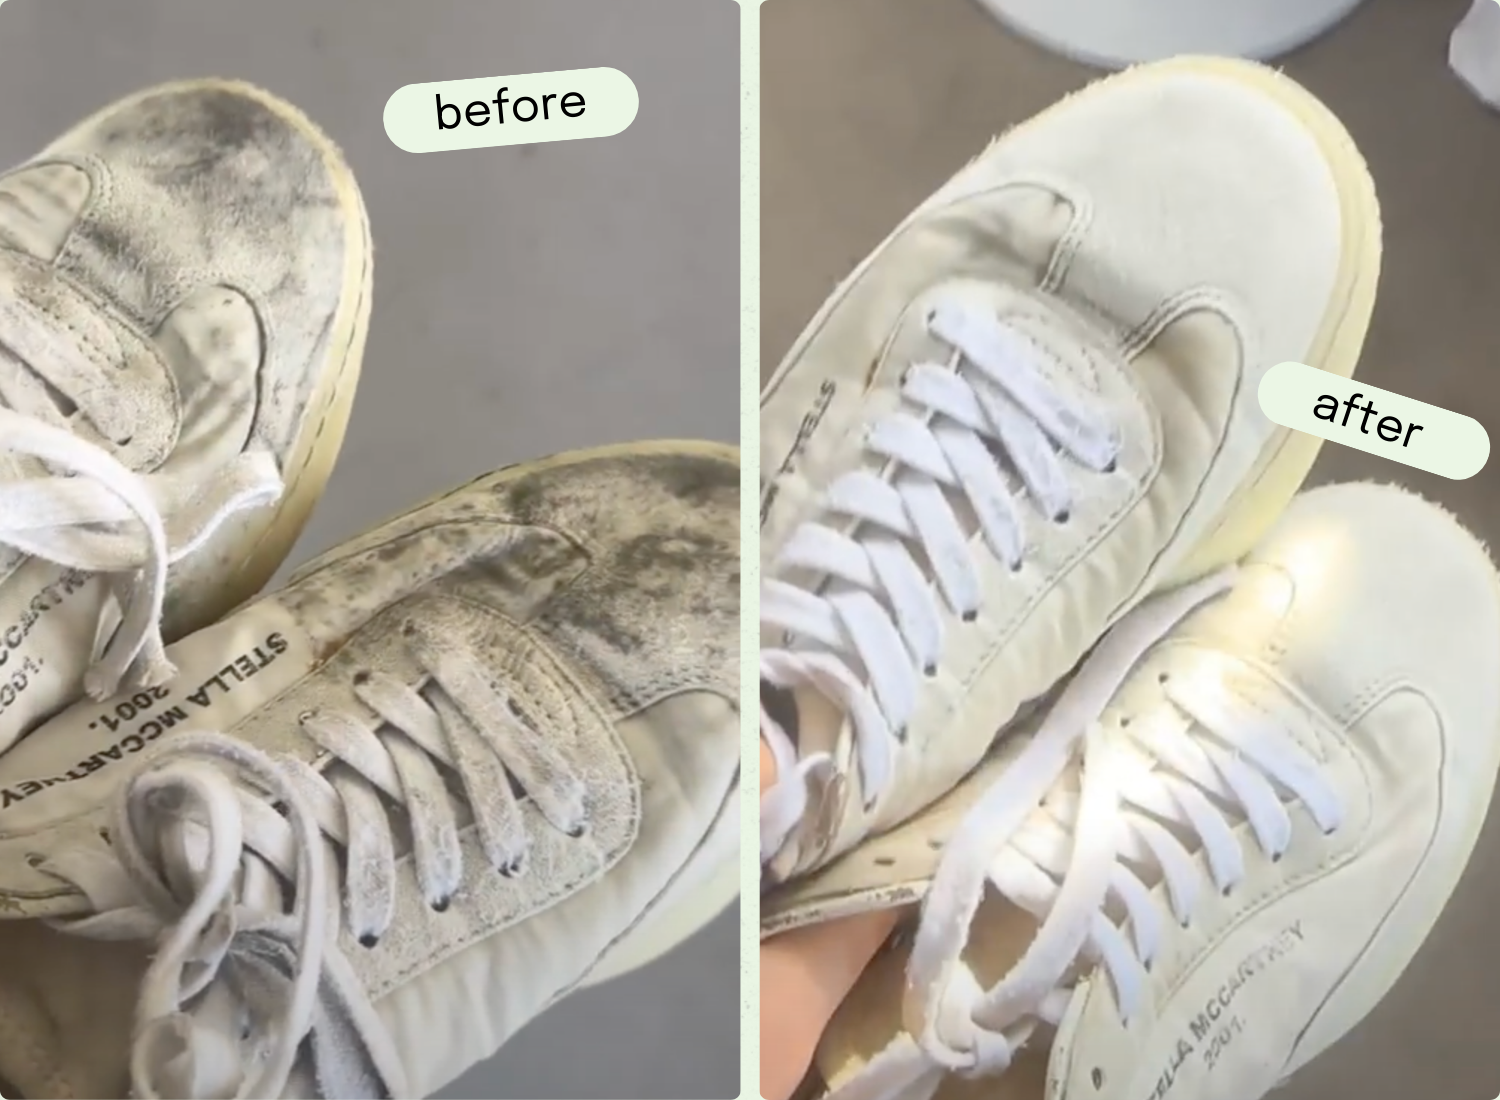 How to clean white shoes to make them look brand new again